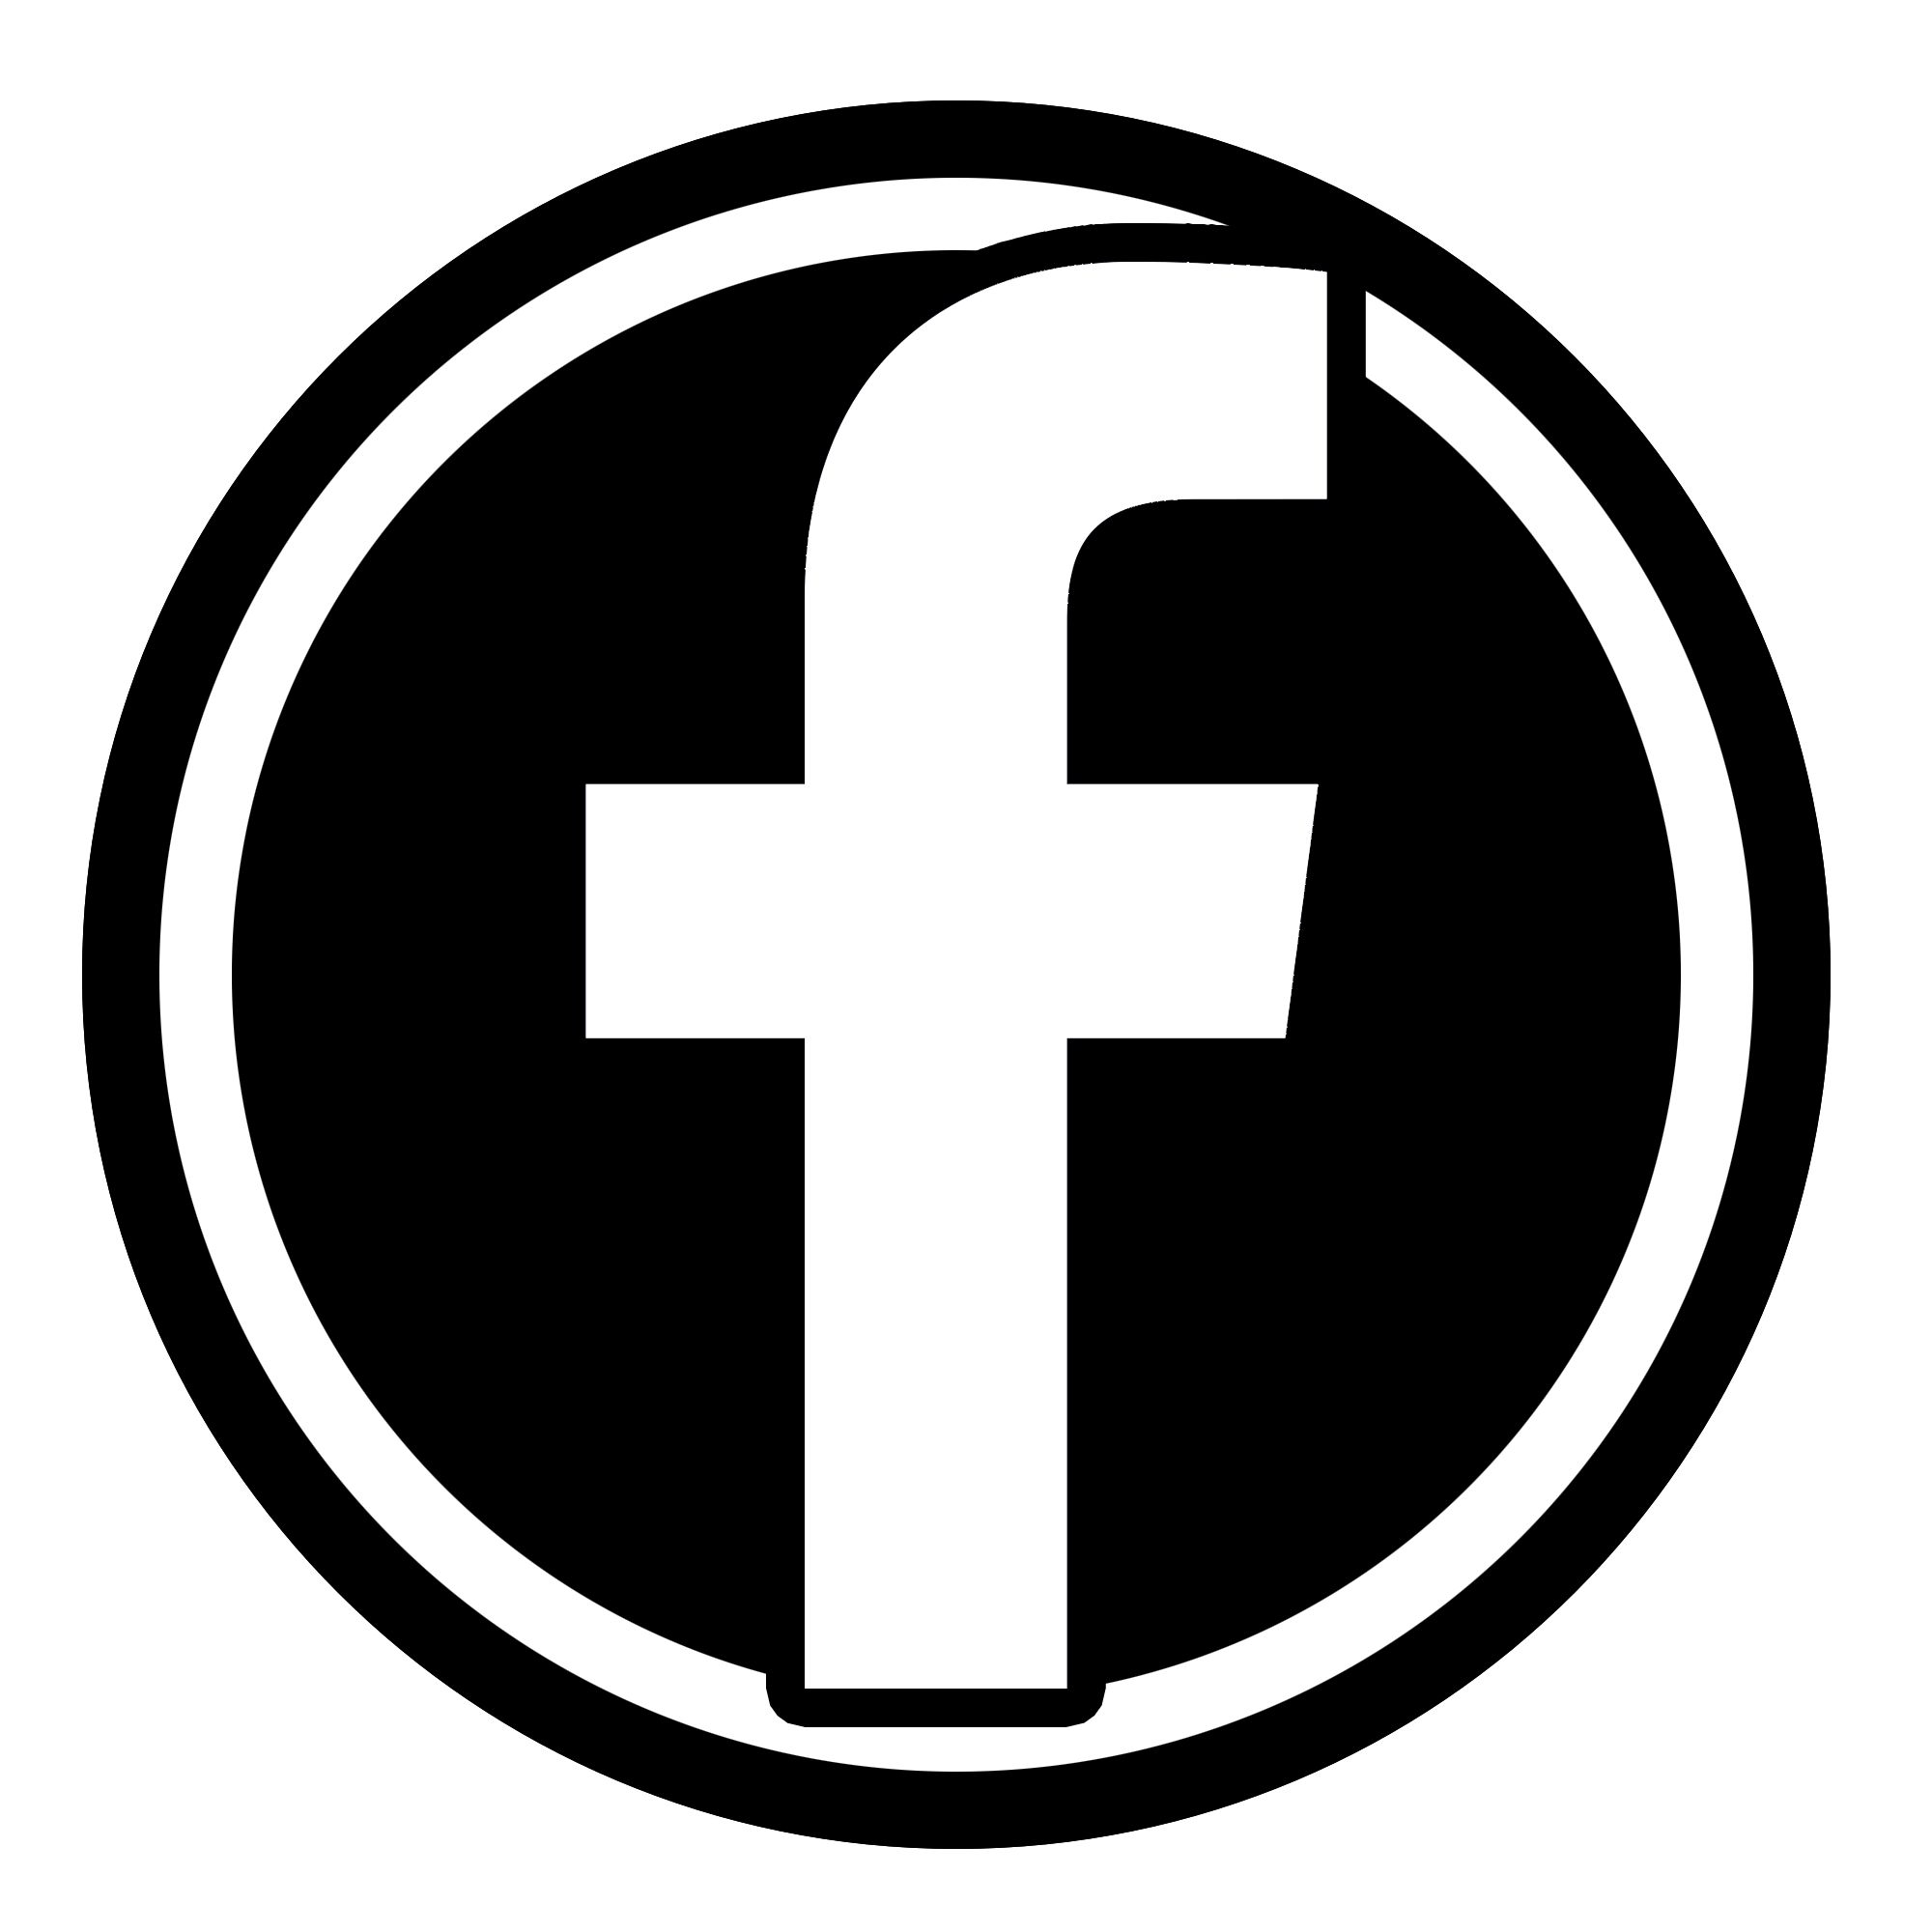 Facebook Icon, Transparent Facebook.PNG Images & Vector - FreeIconsPNG